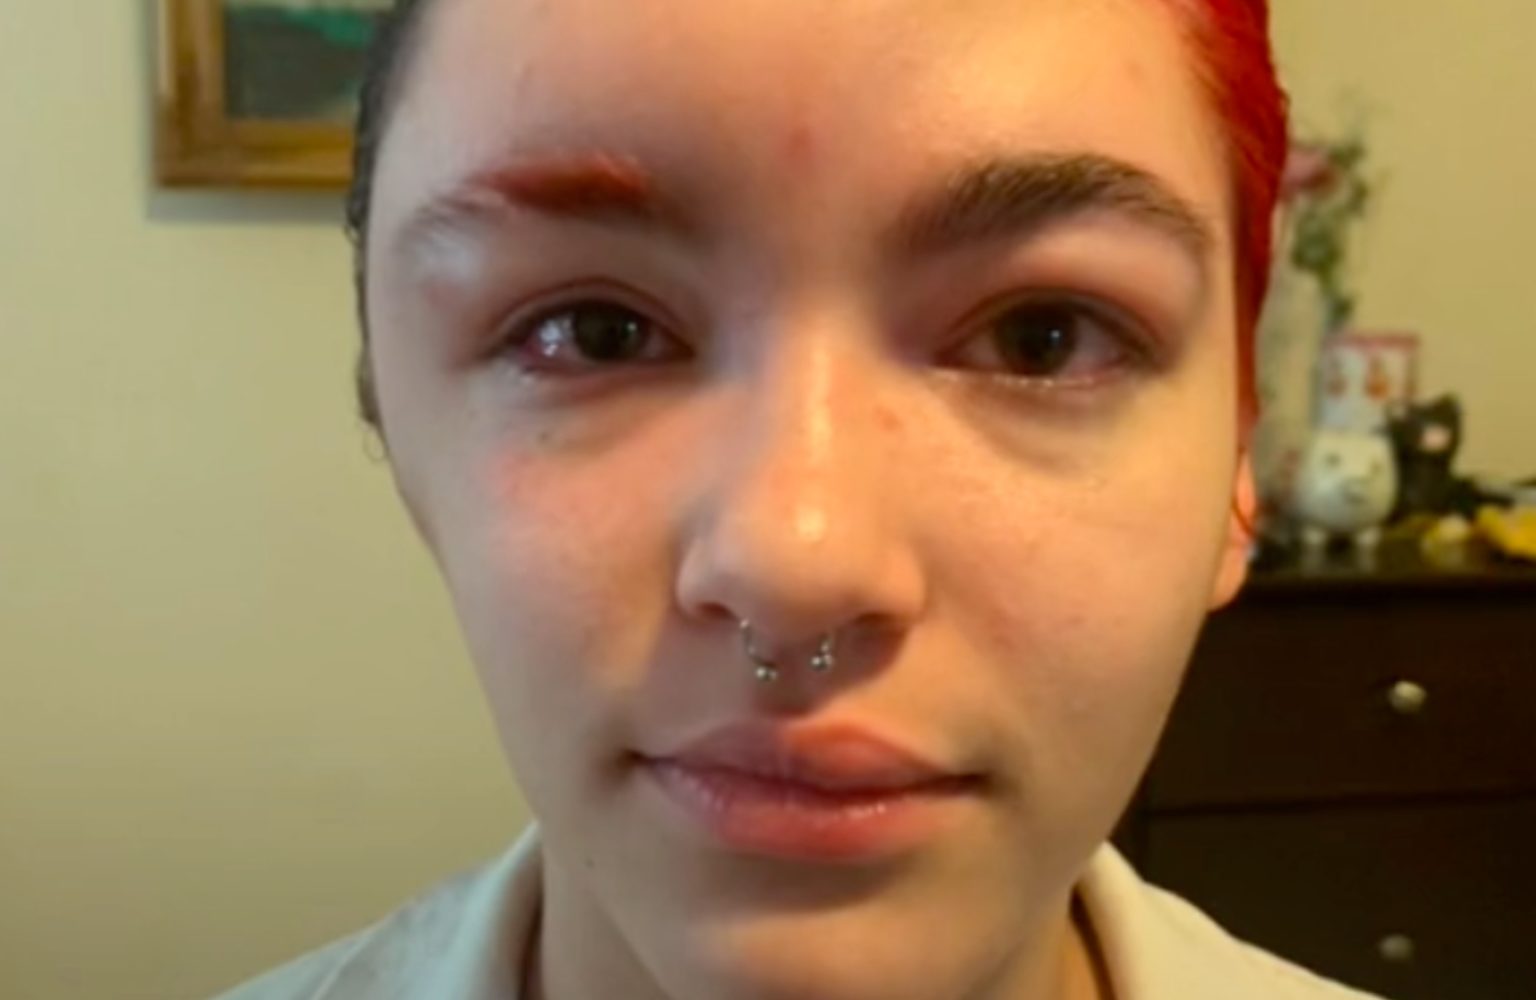 19 Year Old Goes Viral After Allergic Reaction To Hair Dye